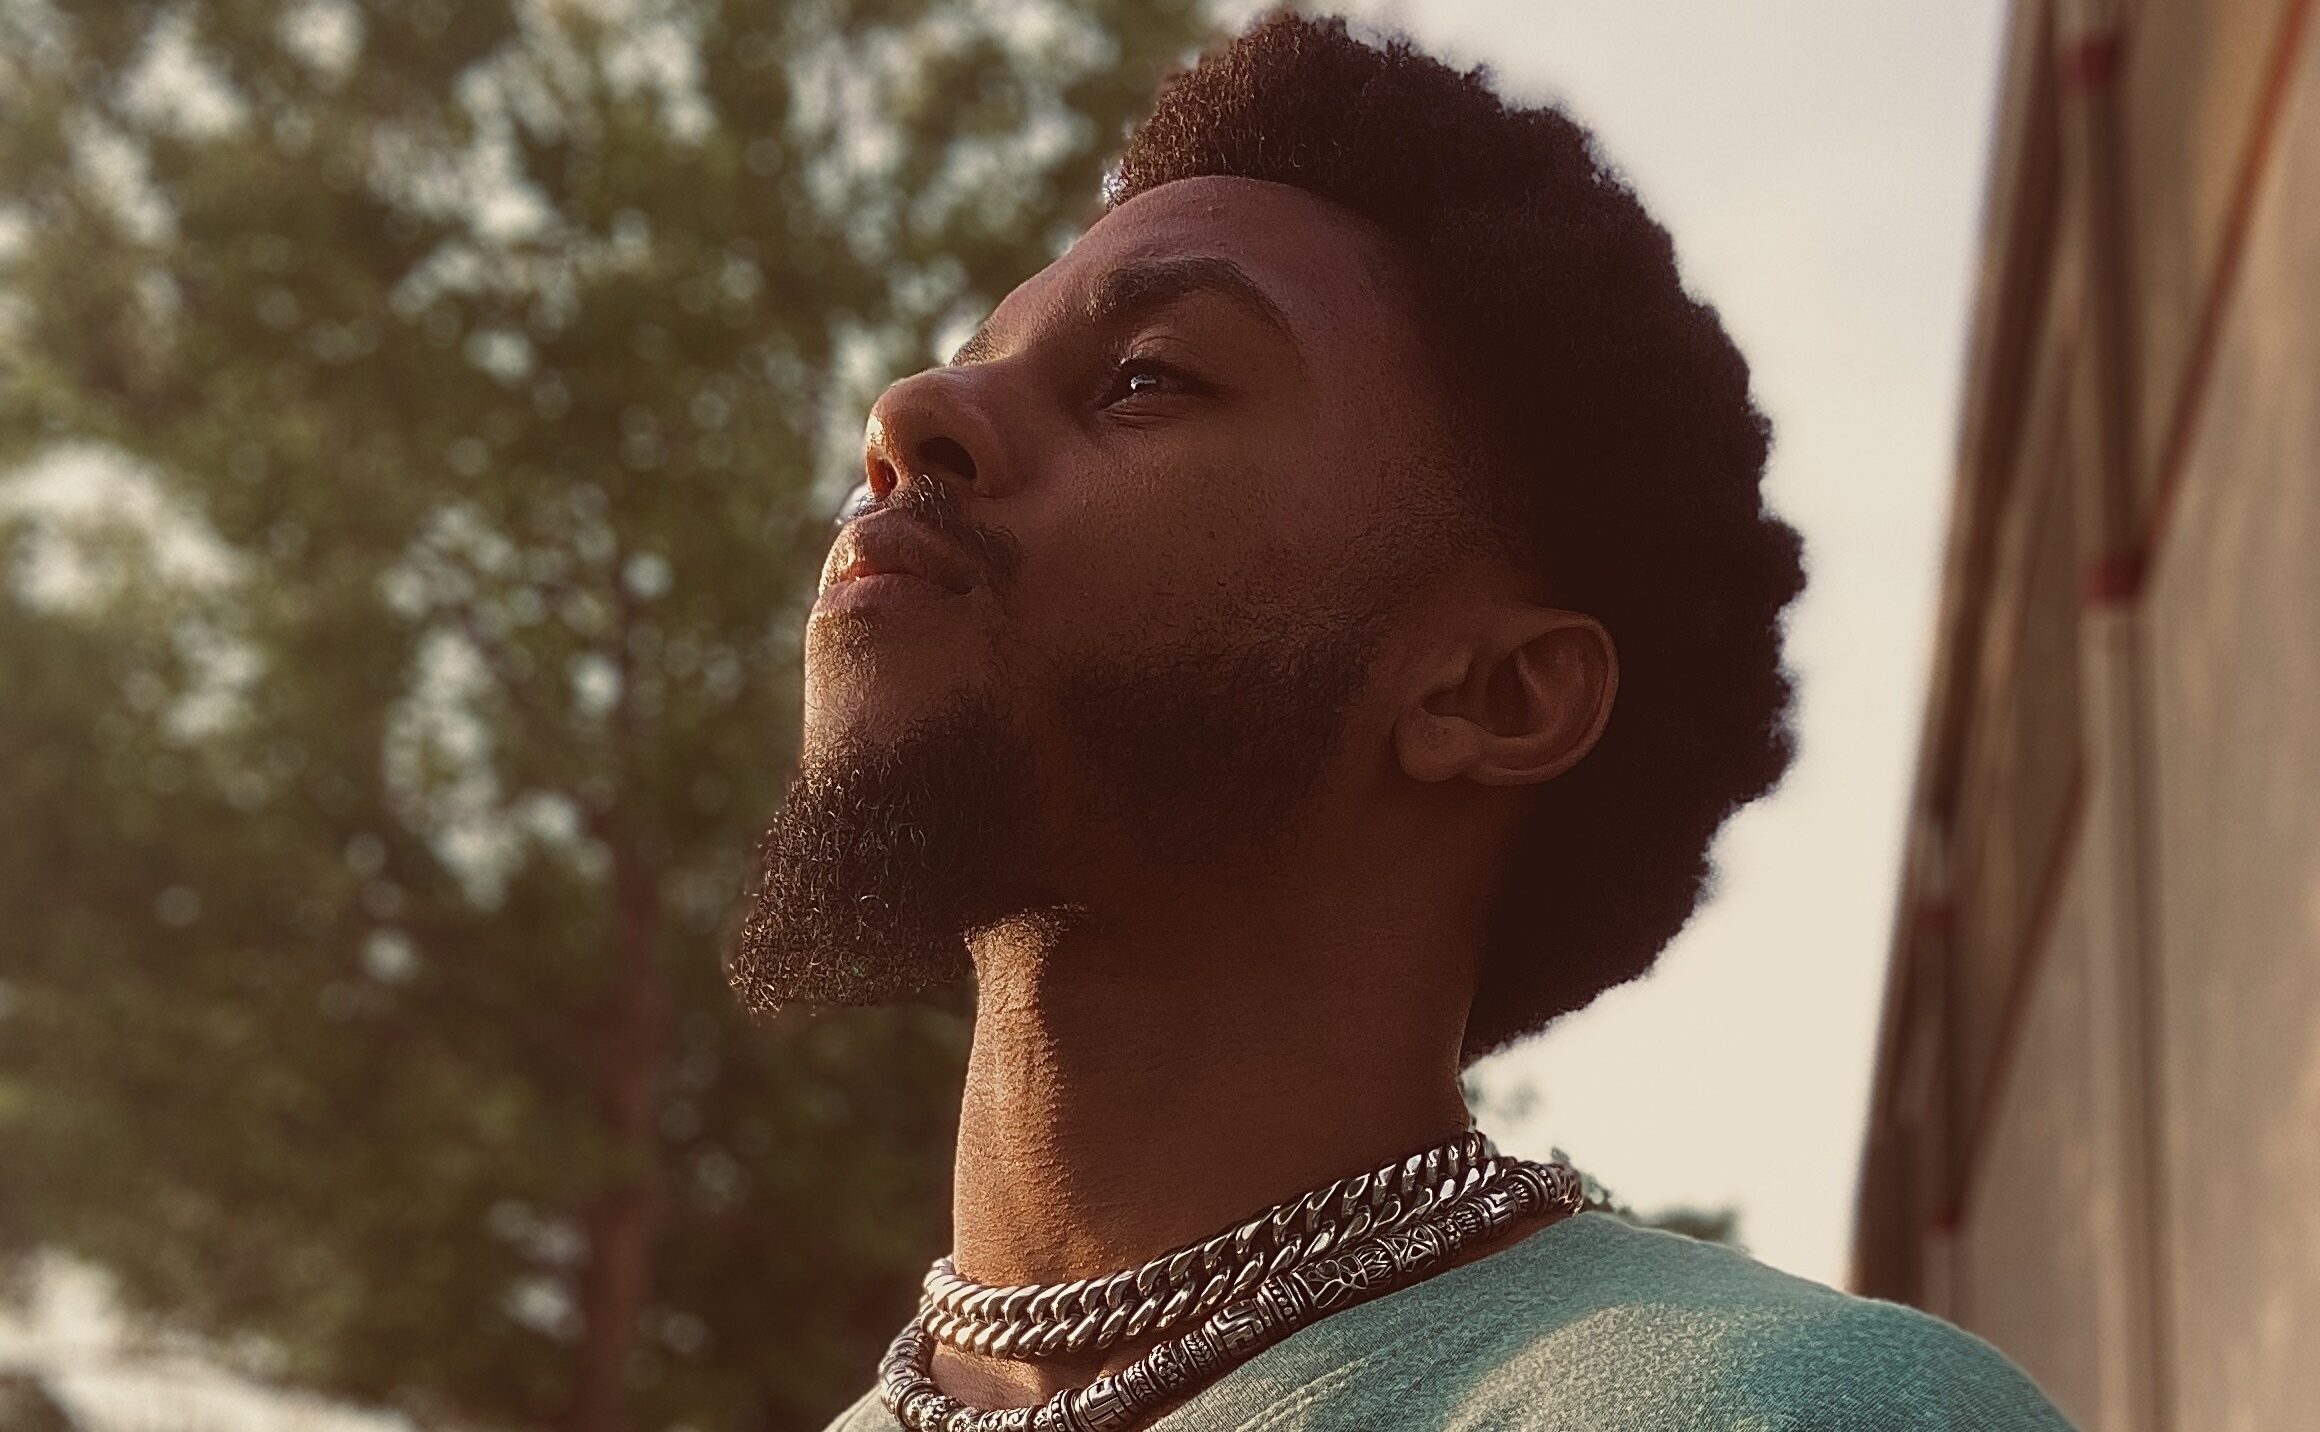 Rising Star: Orlando Rapper Trevor Joseph Is Proudly Disrupting The Scene With DIY Greatness – Debut EP "My Way"